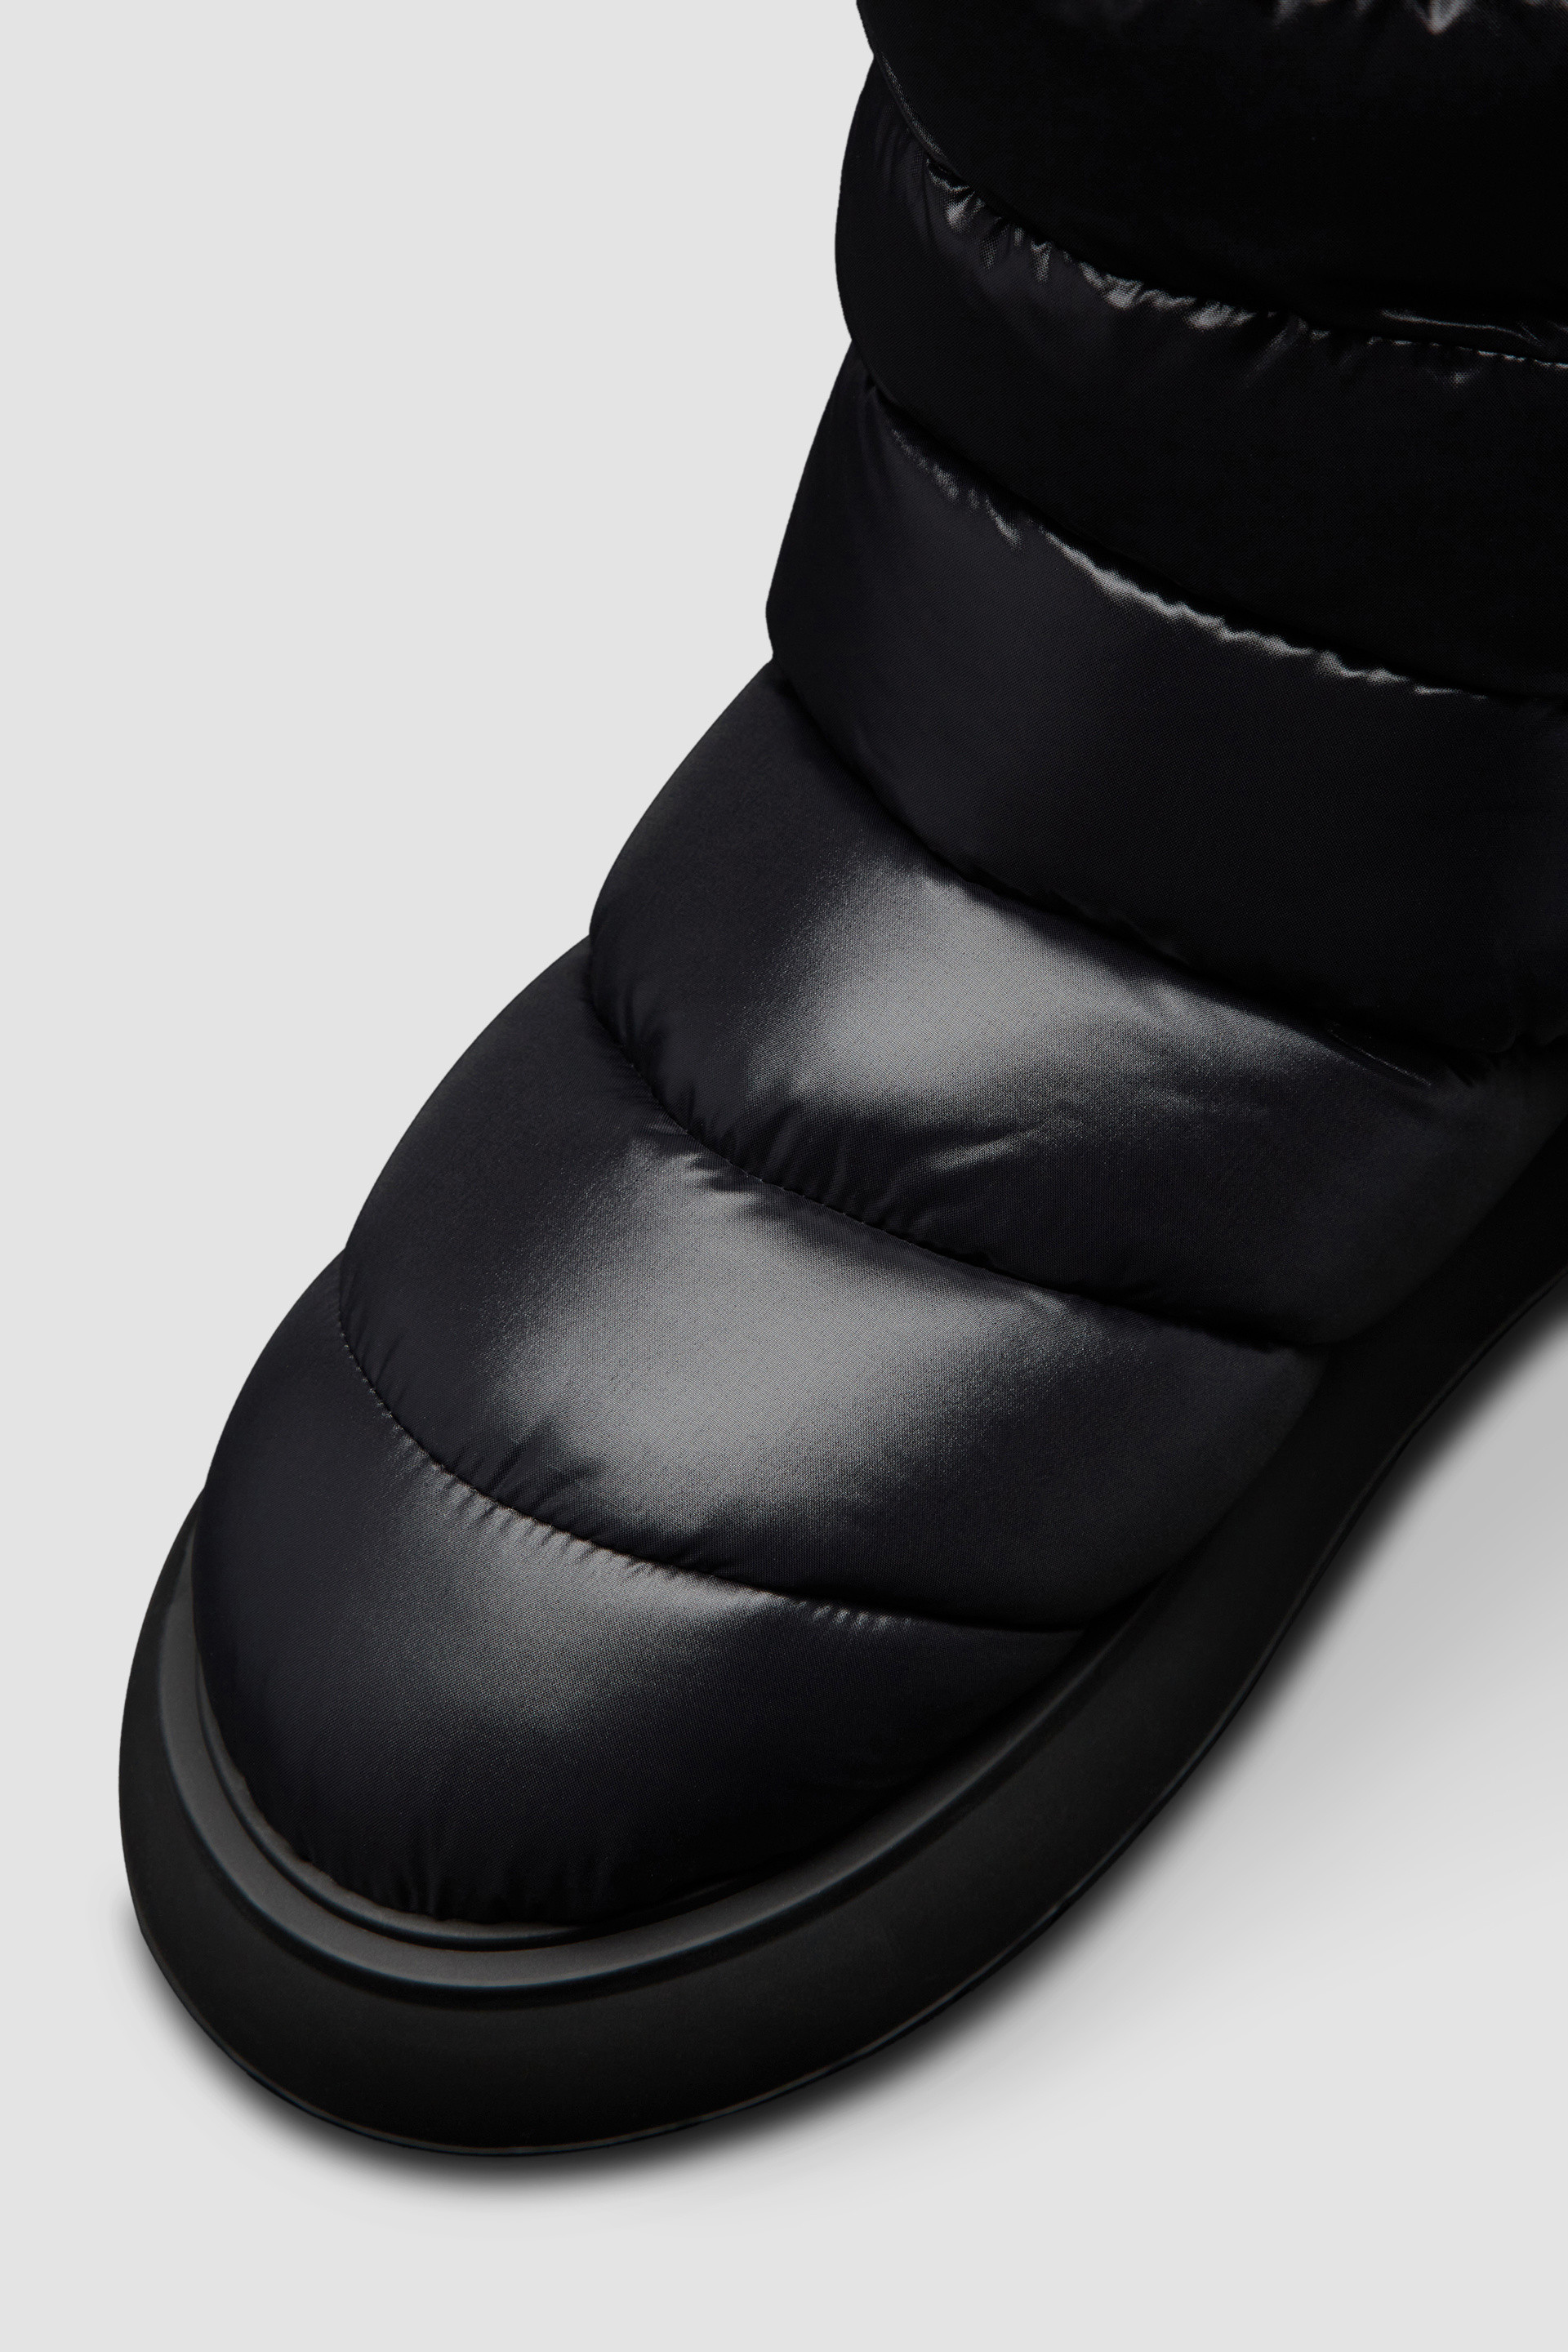 Black Gaia Pocket Mid Boots - Boots for Women | Moncler US